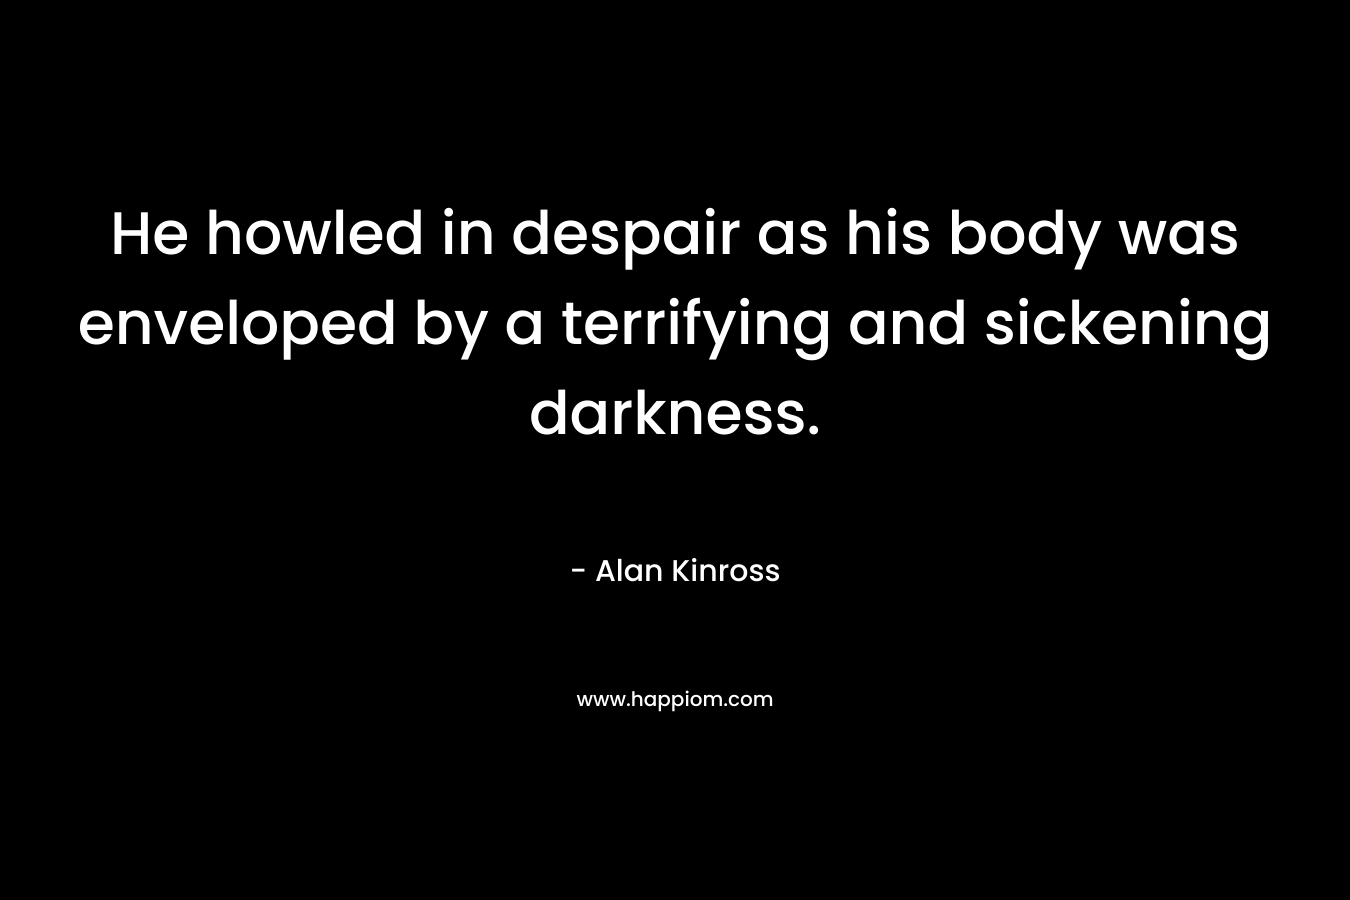 He howled in despair as his body was enveloped by a terrifying and sickening darkness. – Alan Kinross